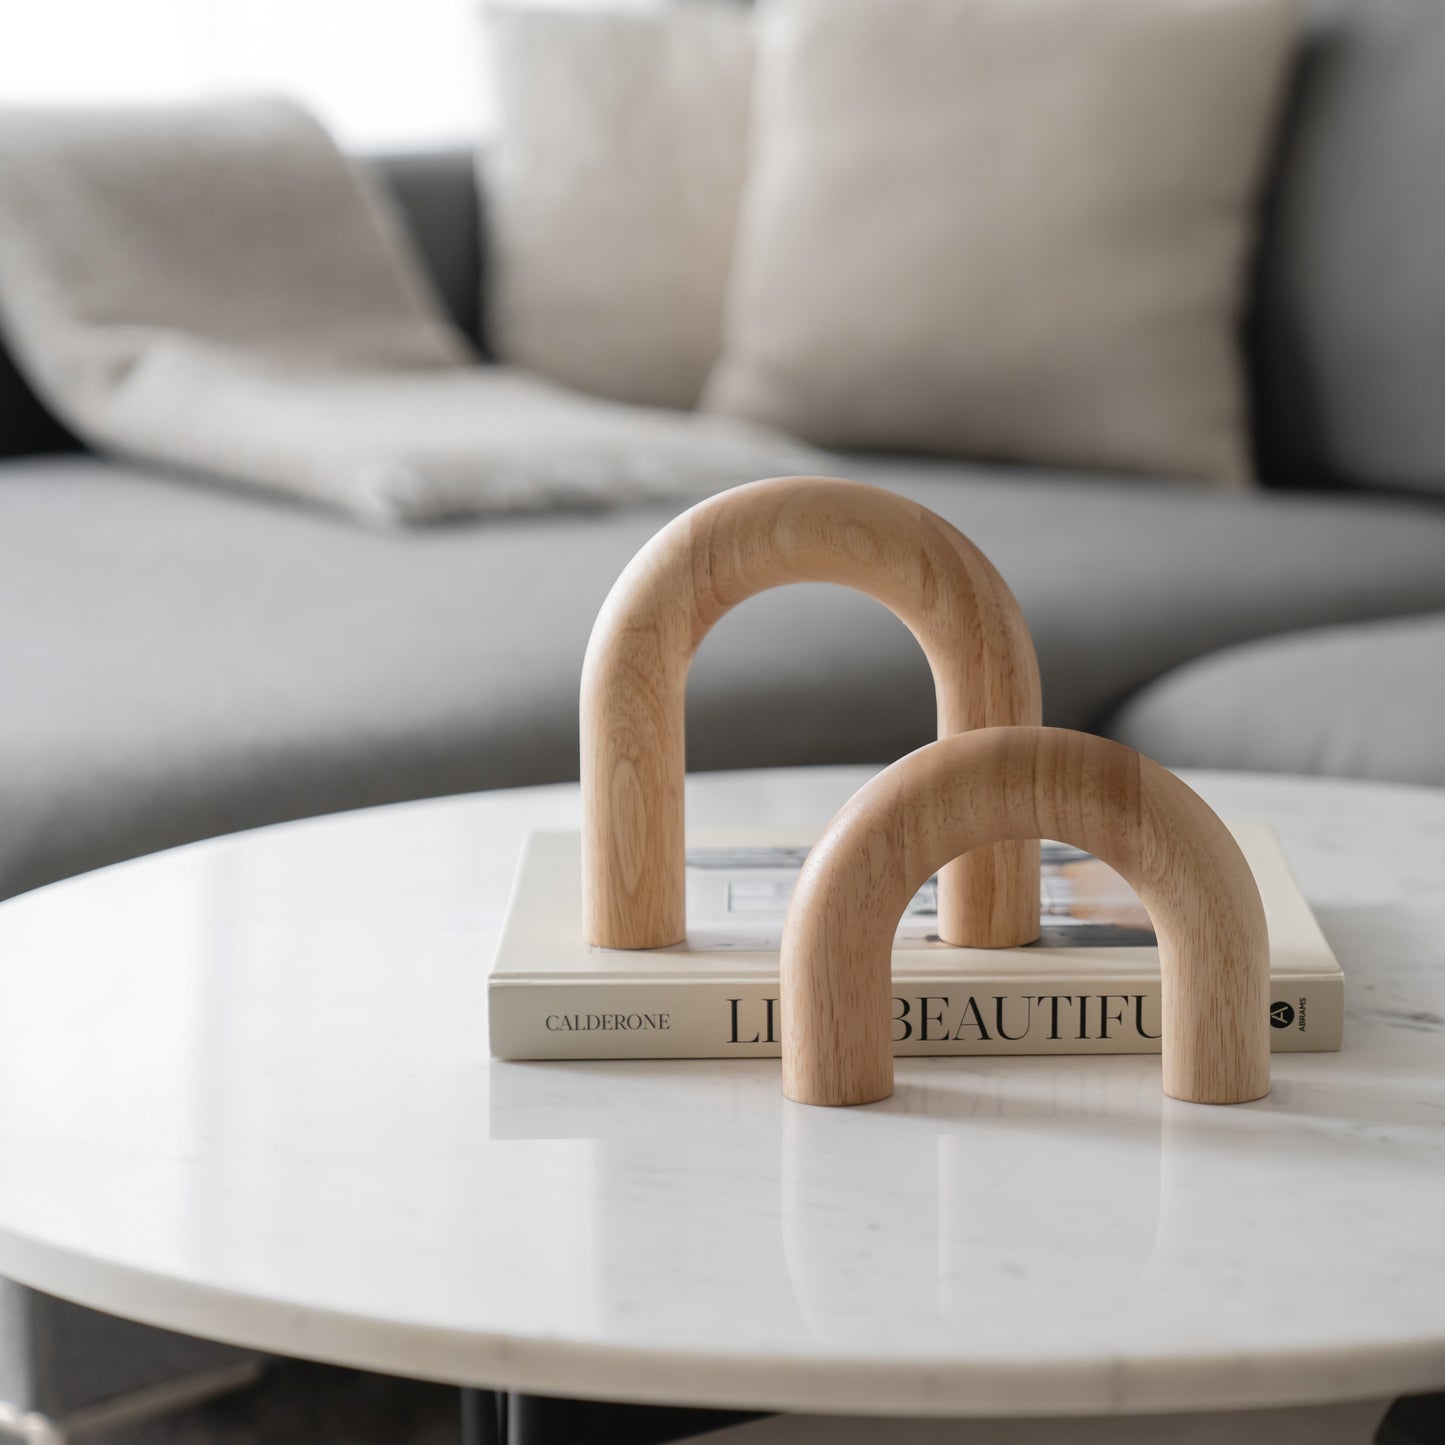 Wood Arch Decorative Objects - Create a cozy and inviting atmosphere with our handcrafted wooden arch decor pieces